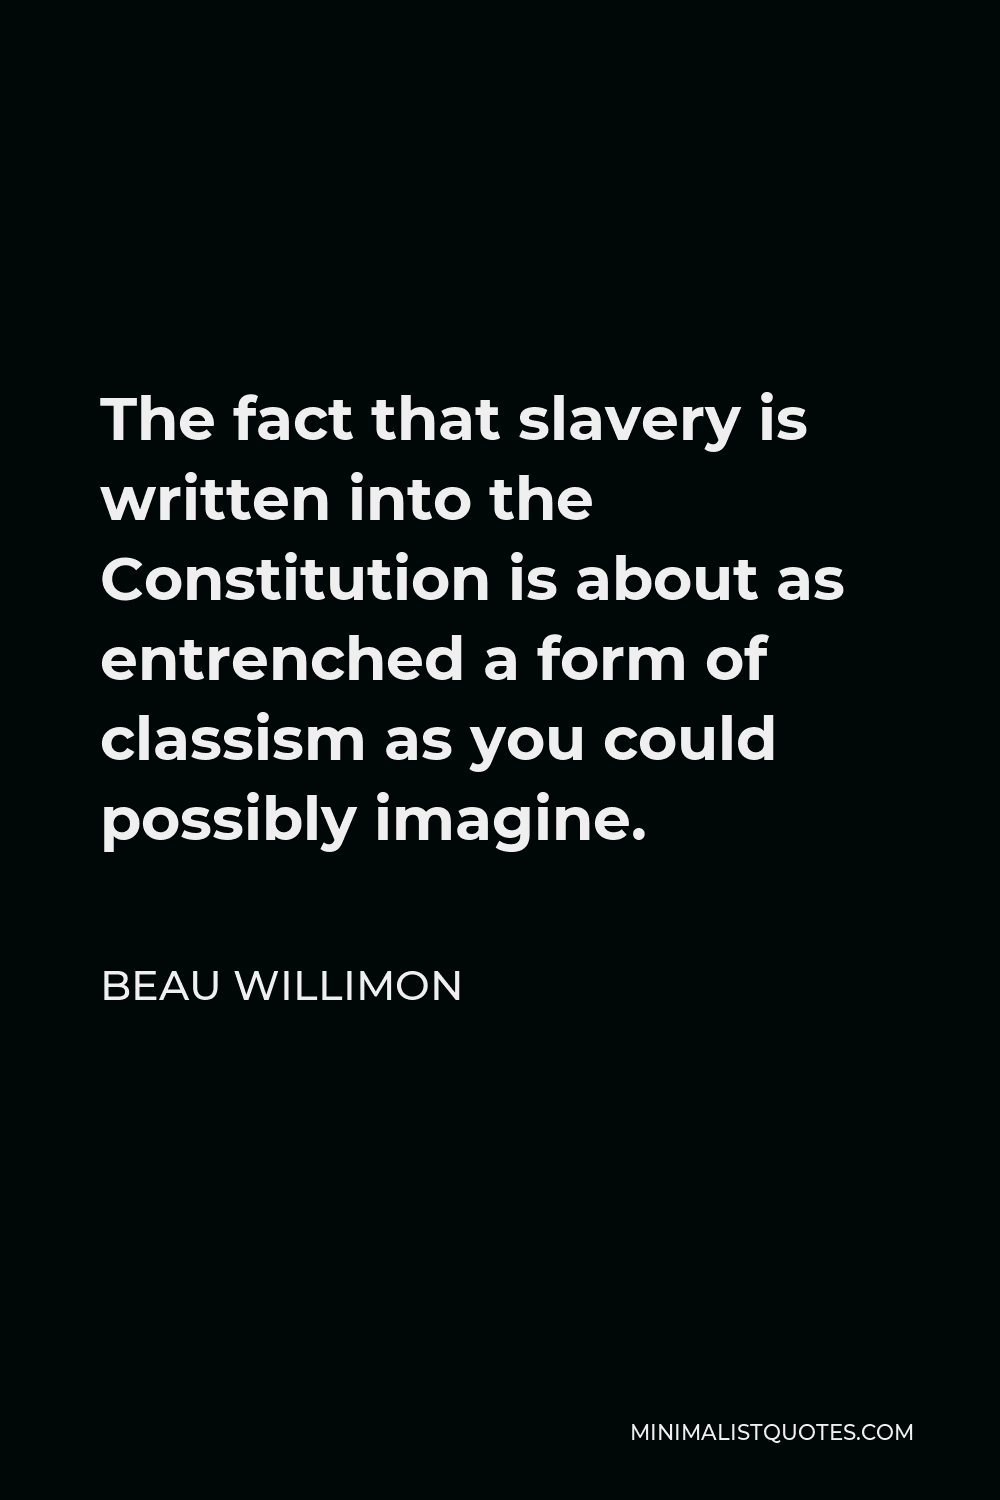 Beau Willimon Quote - The fact that slavery is written into the Constitution is about as entrenched a form of classism as you could possibly imagine.